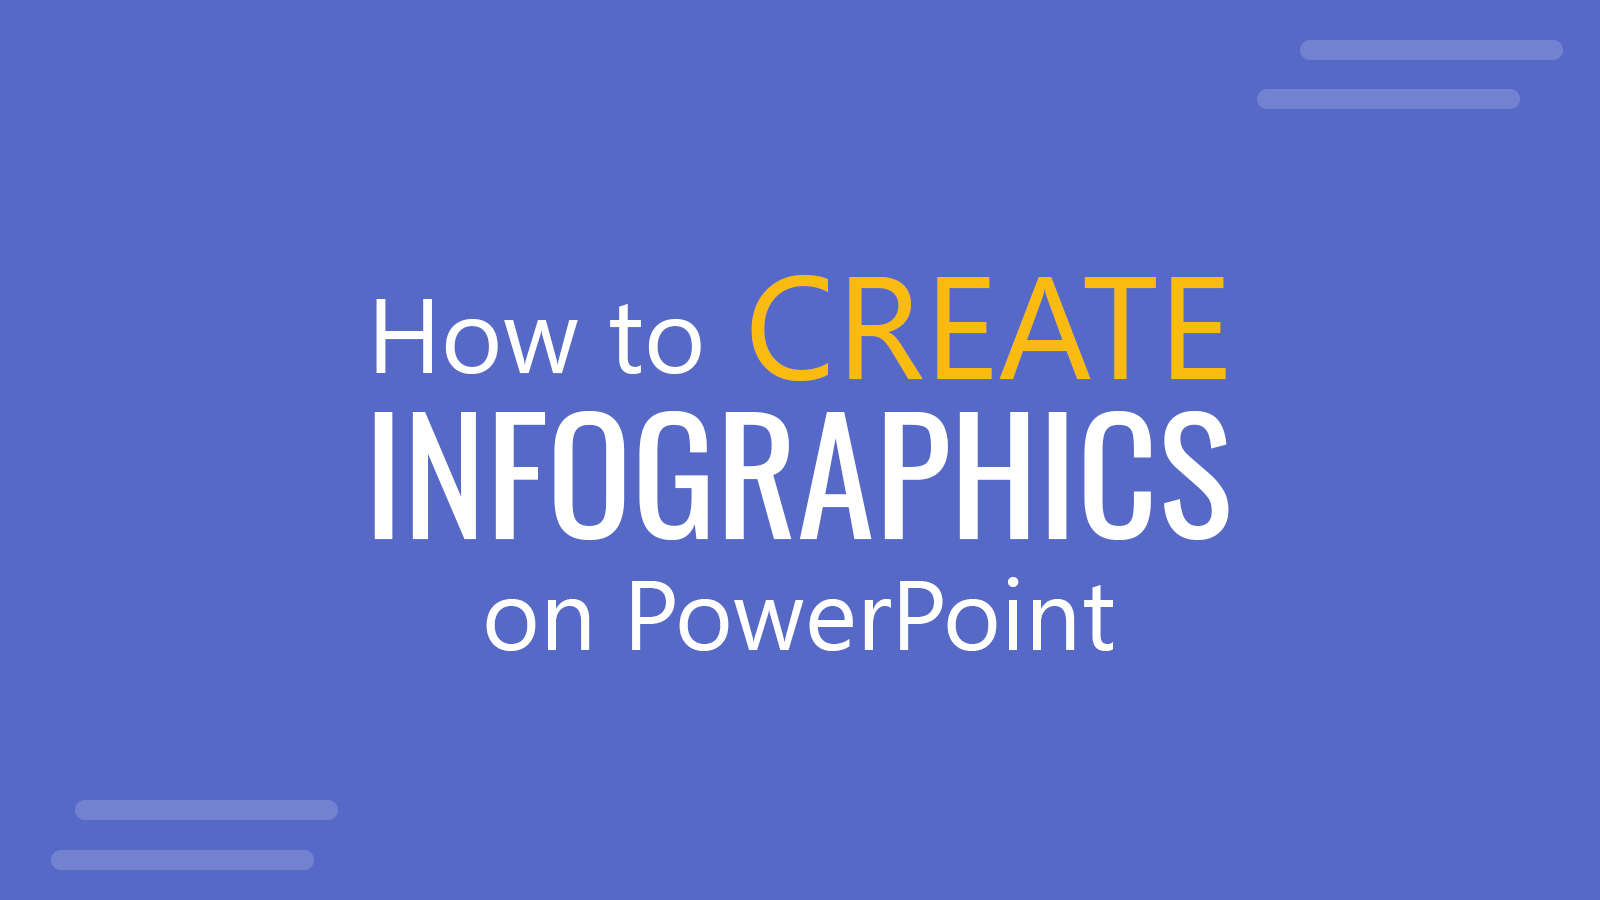 How To Create Infographics on PowerPoint